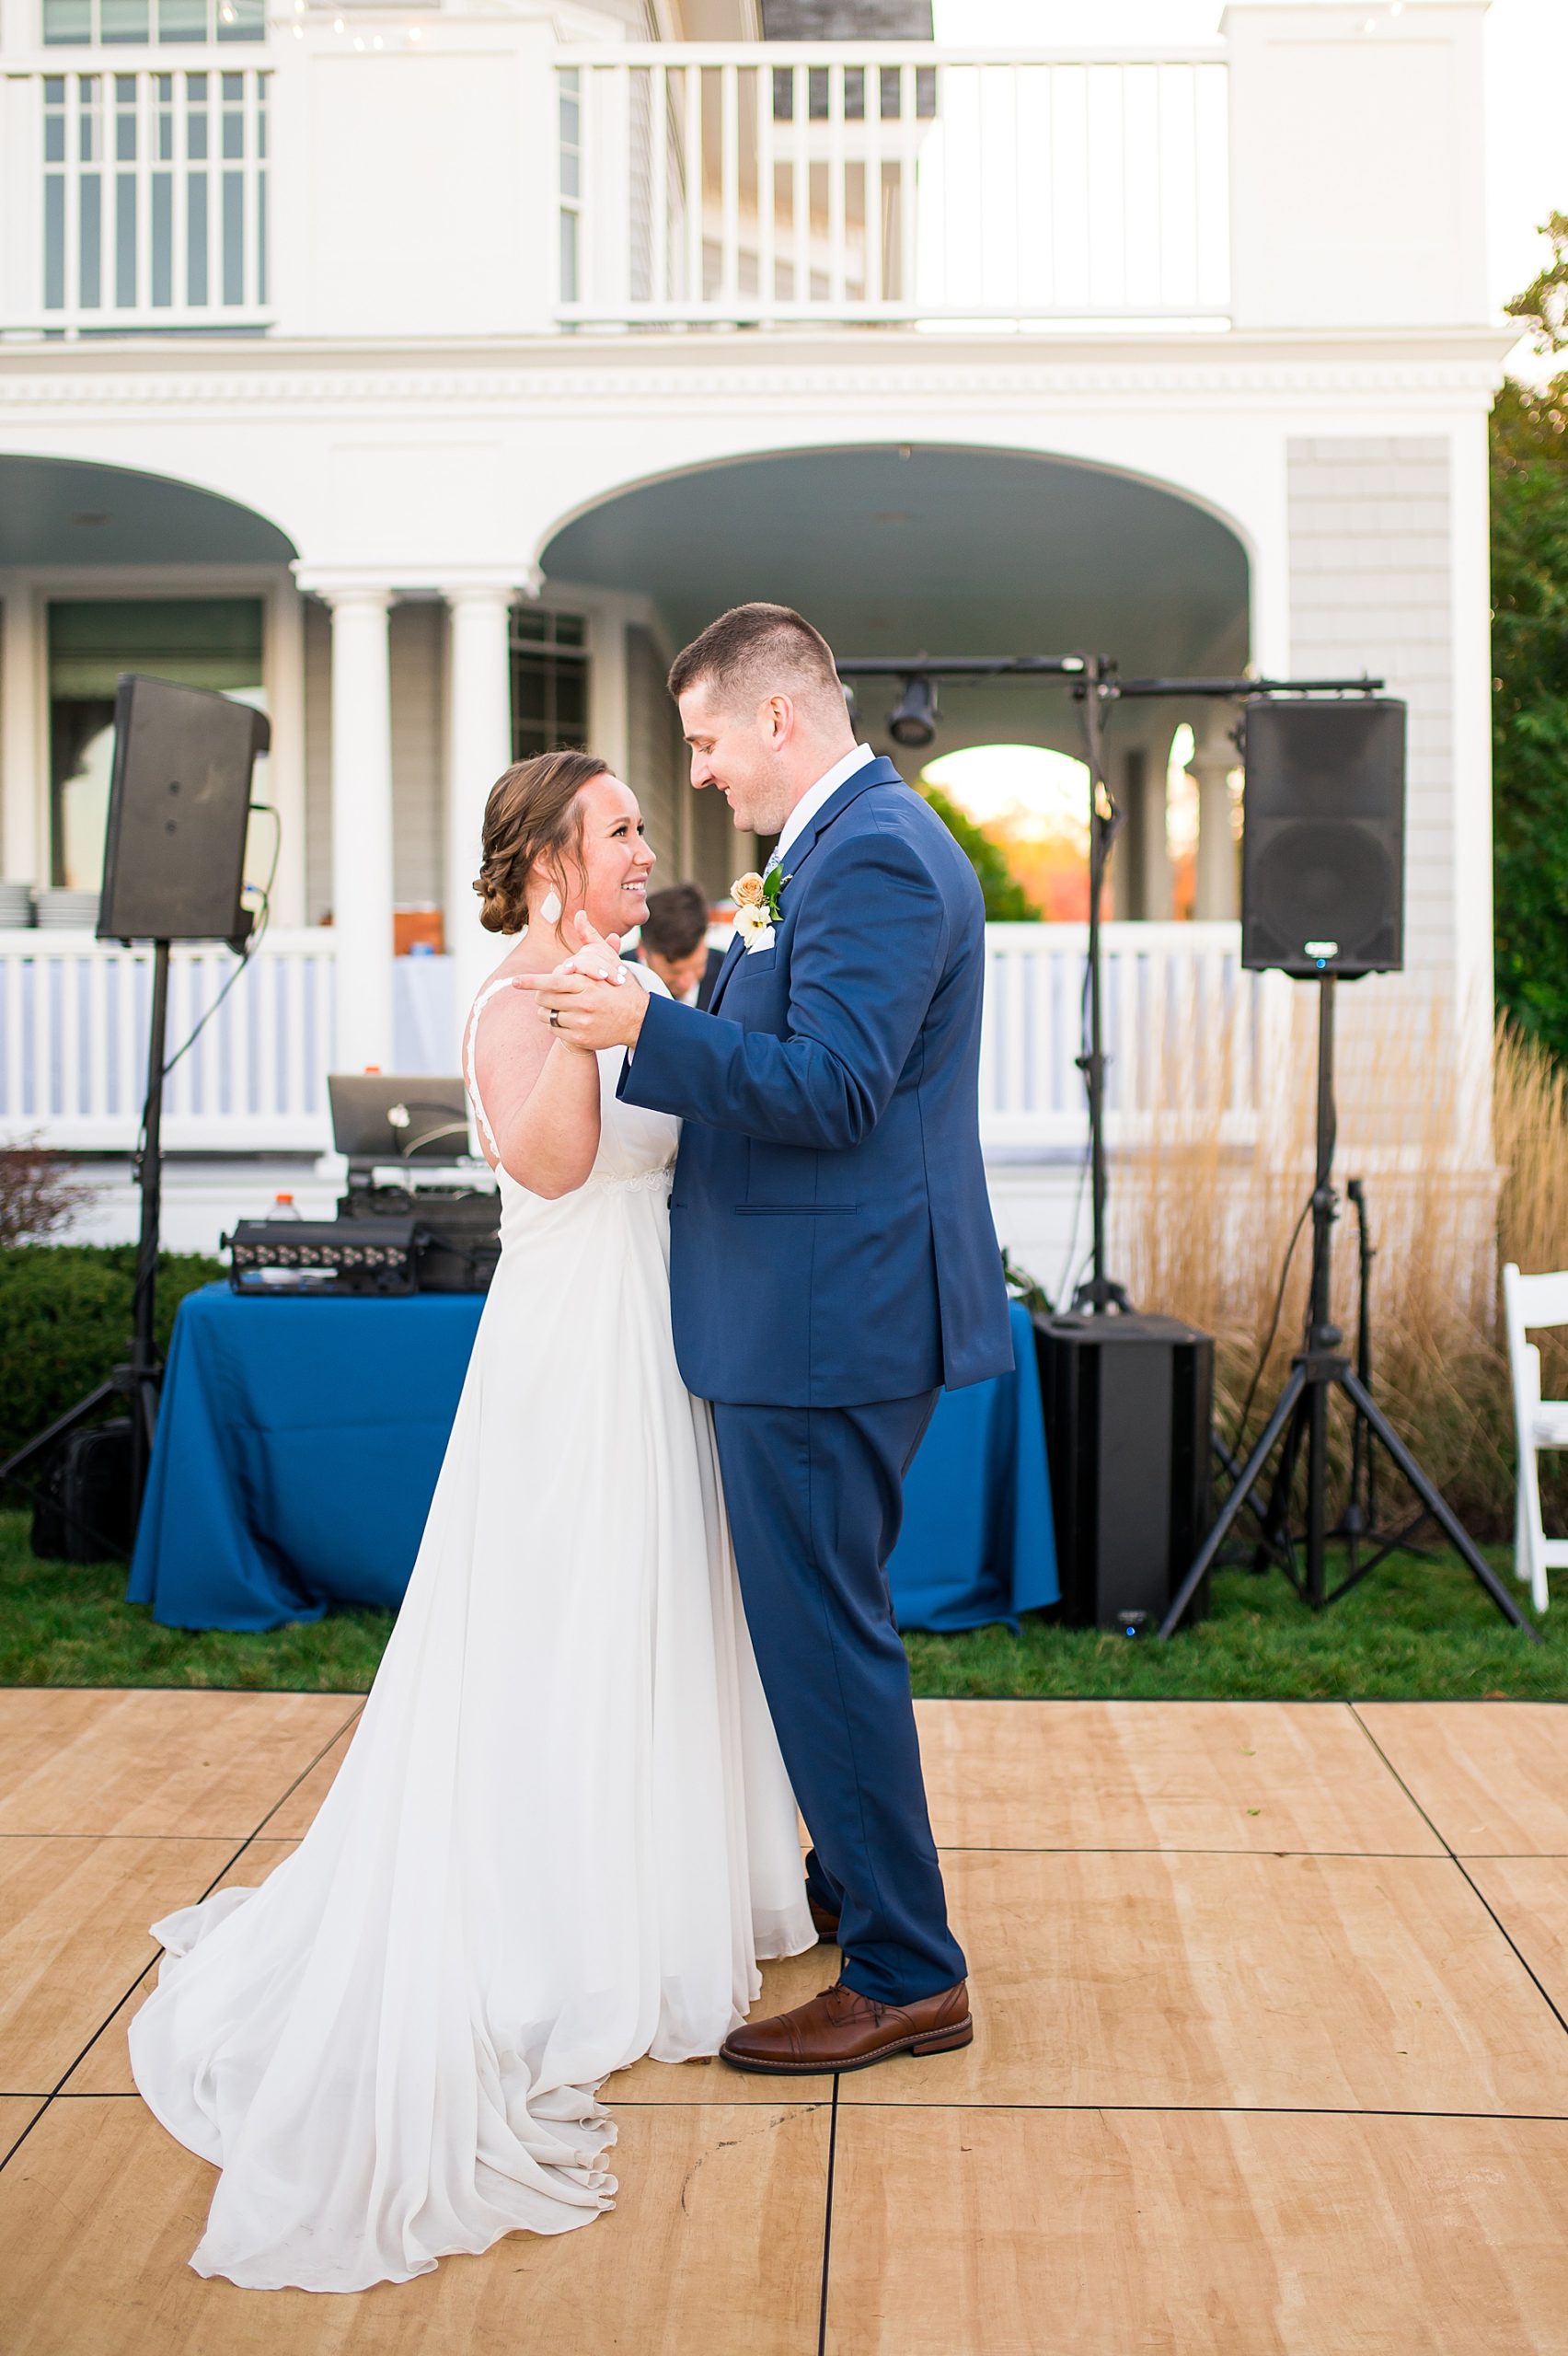 Newlyweds dance as husband and wife at outdoor Oceanfront Autumn Wedding reception